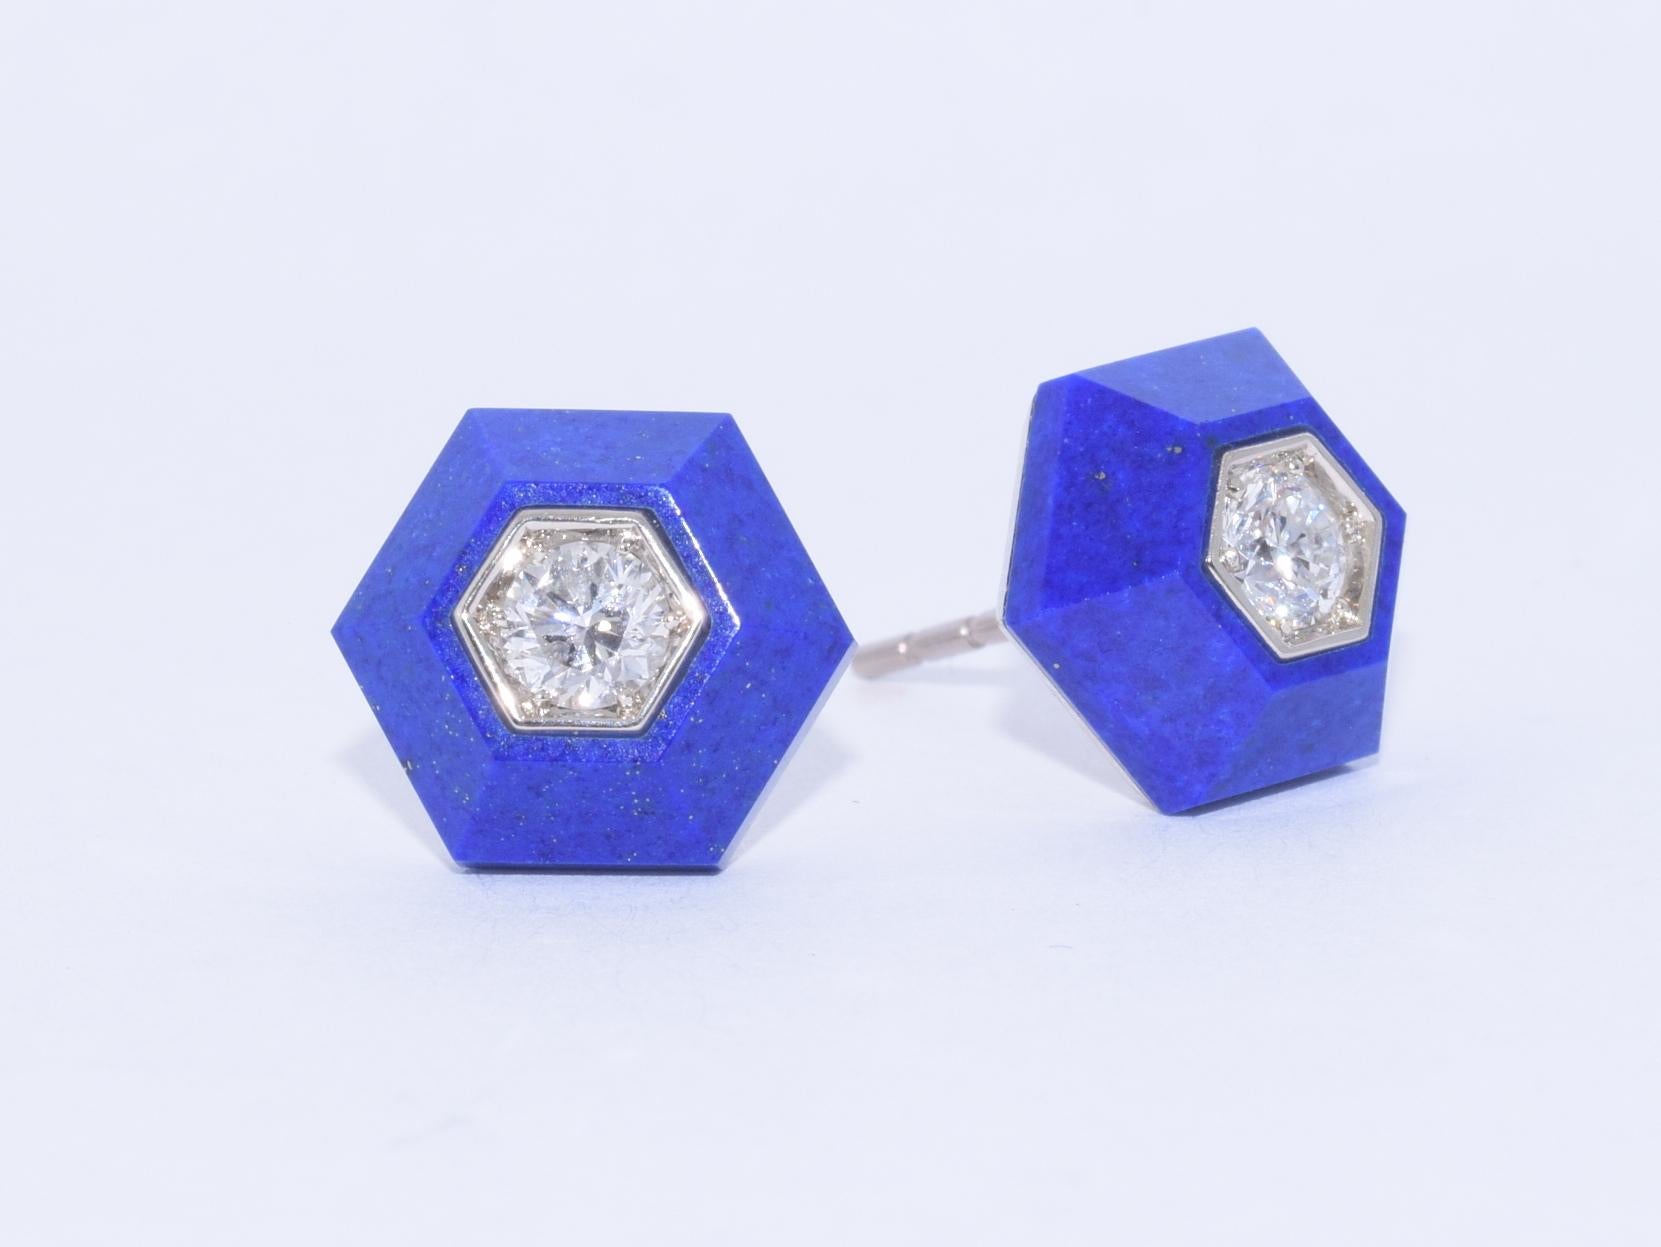 Each designed as an hexagonal lapis lazuli stud set with a central round brilliant diamond, weighing a total of 0.36 carats, signed Fred Leighton. The earrings measure approximately 11 x 9.6mm. 

Fred Leighton is renowned for their extraordinary